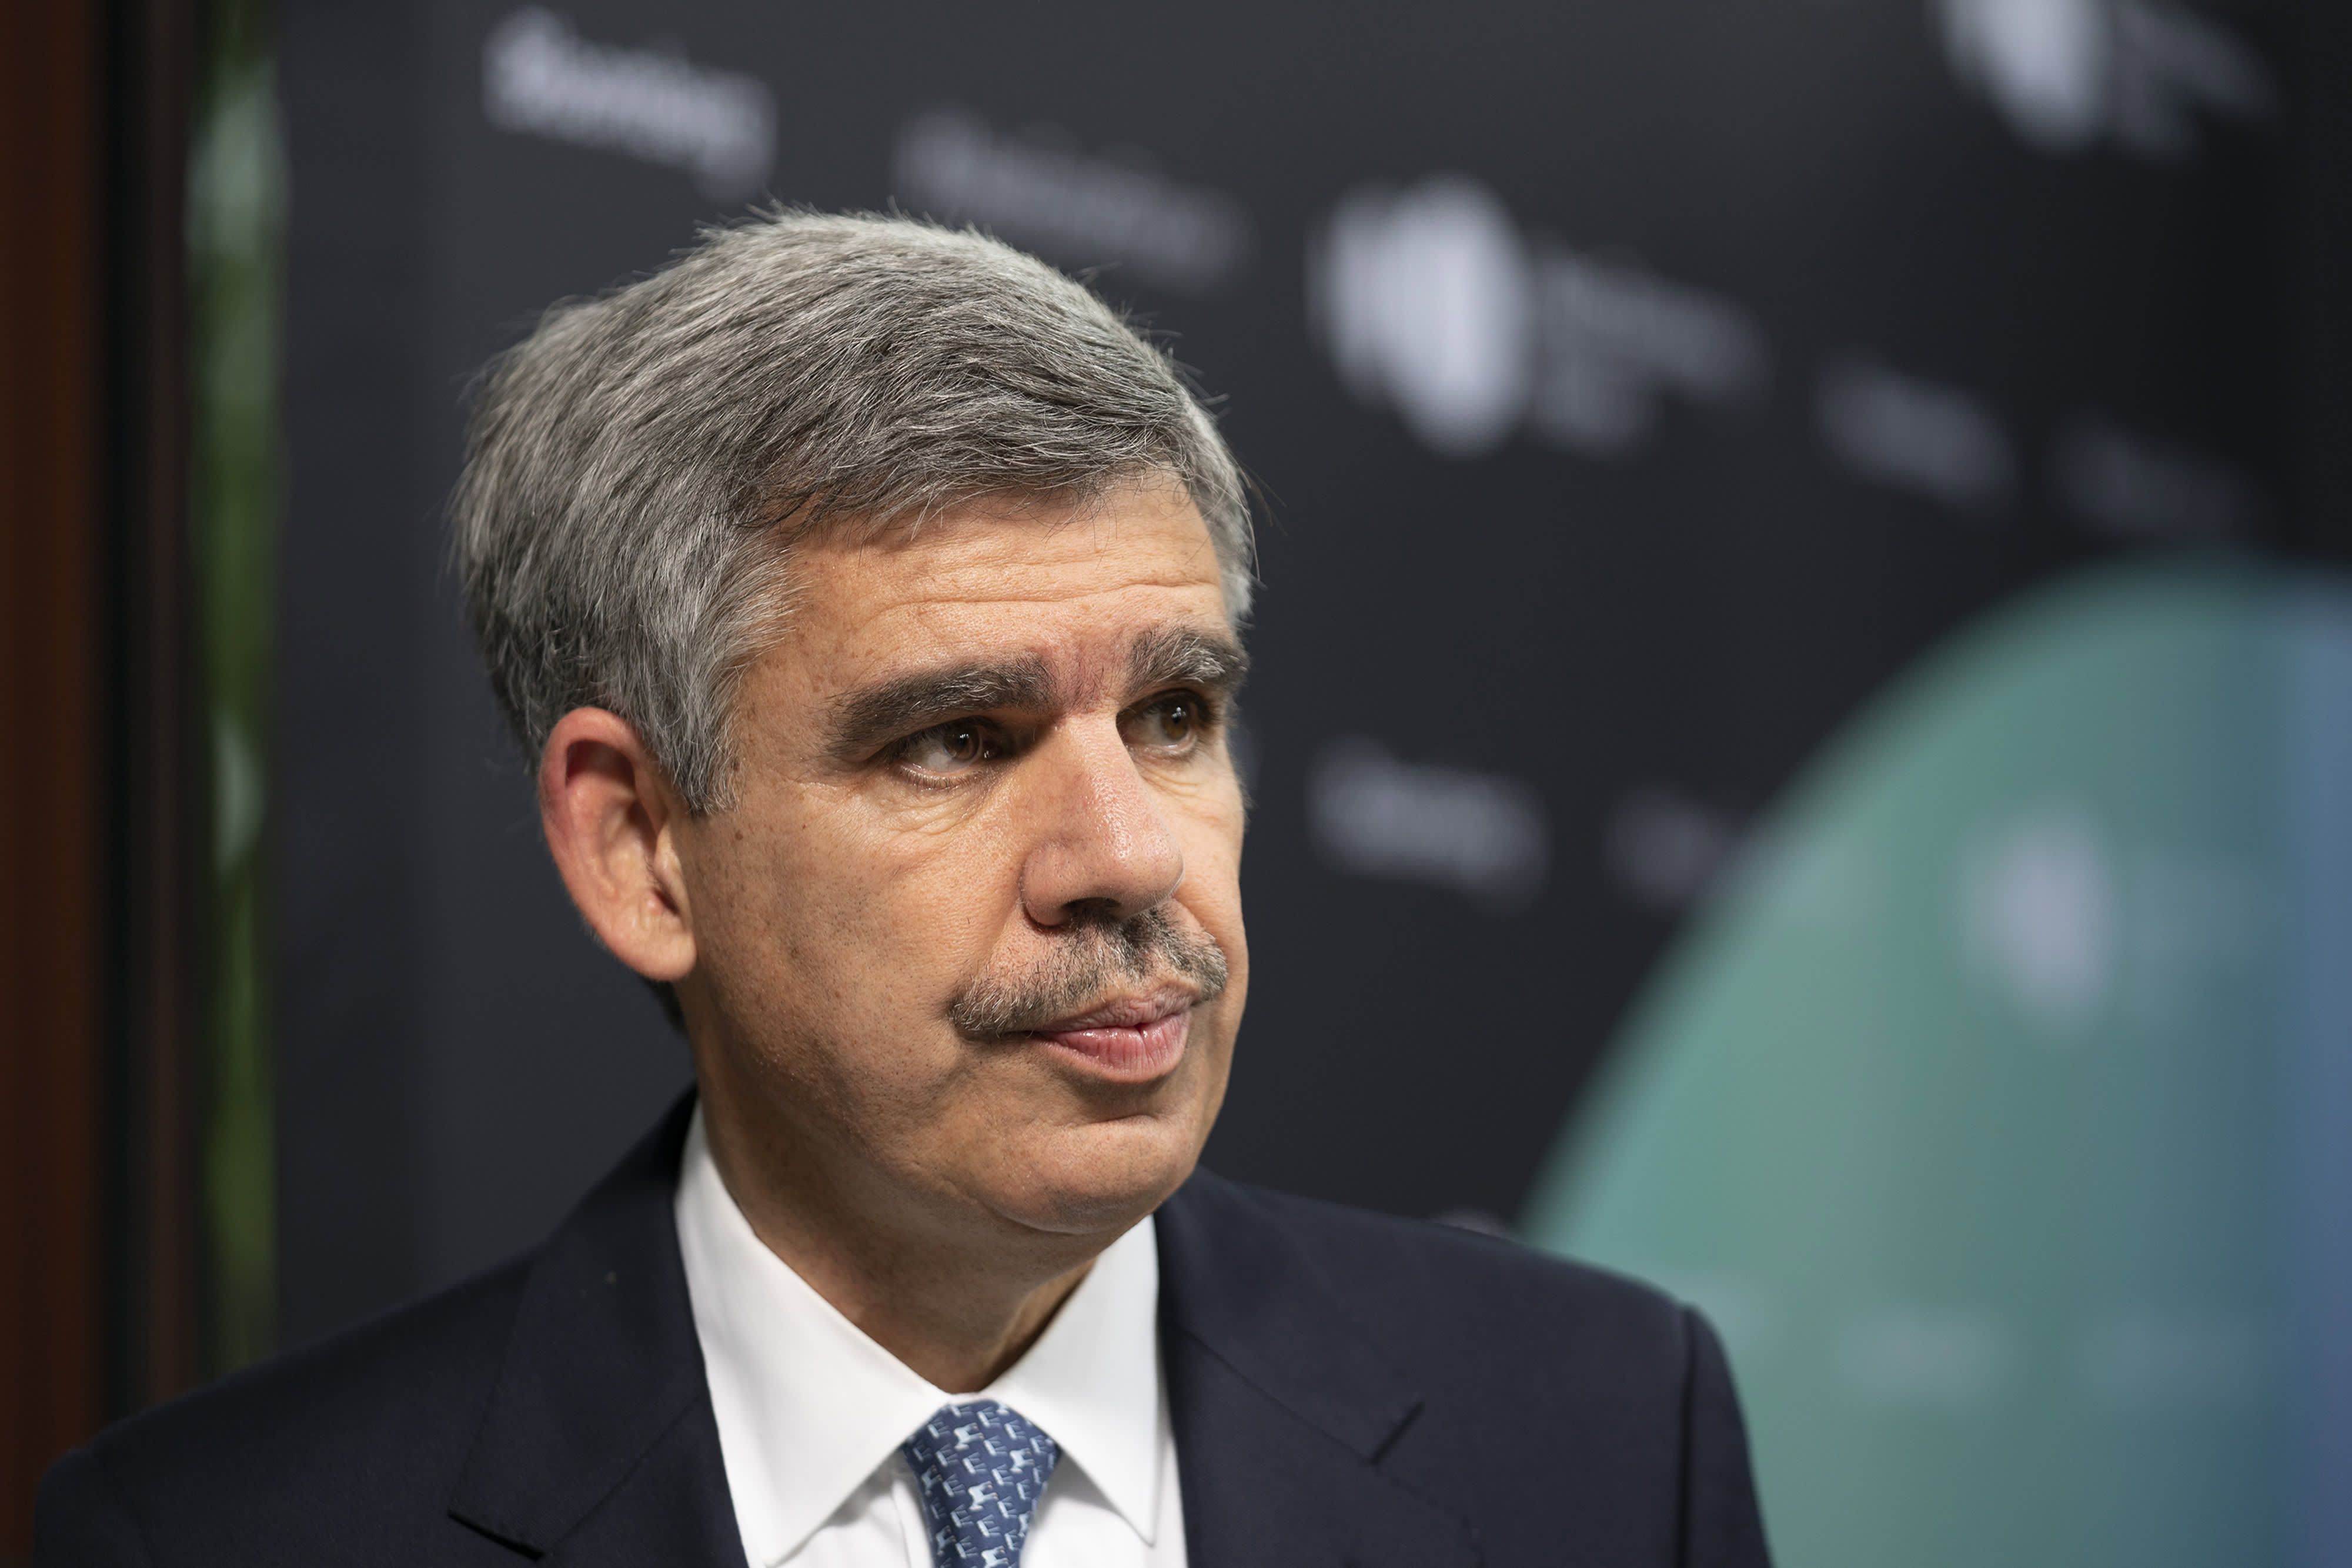 Fed is losing credibility over its inflation narrative, Mohamed El-Erian says - CNBC